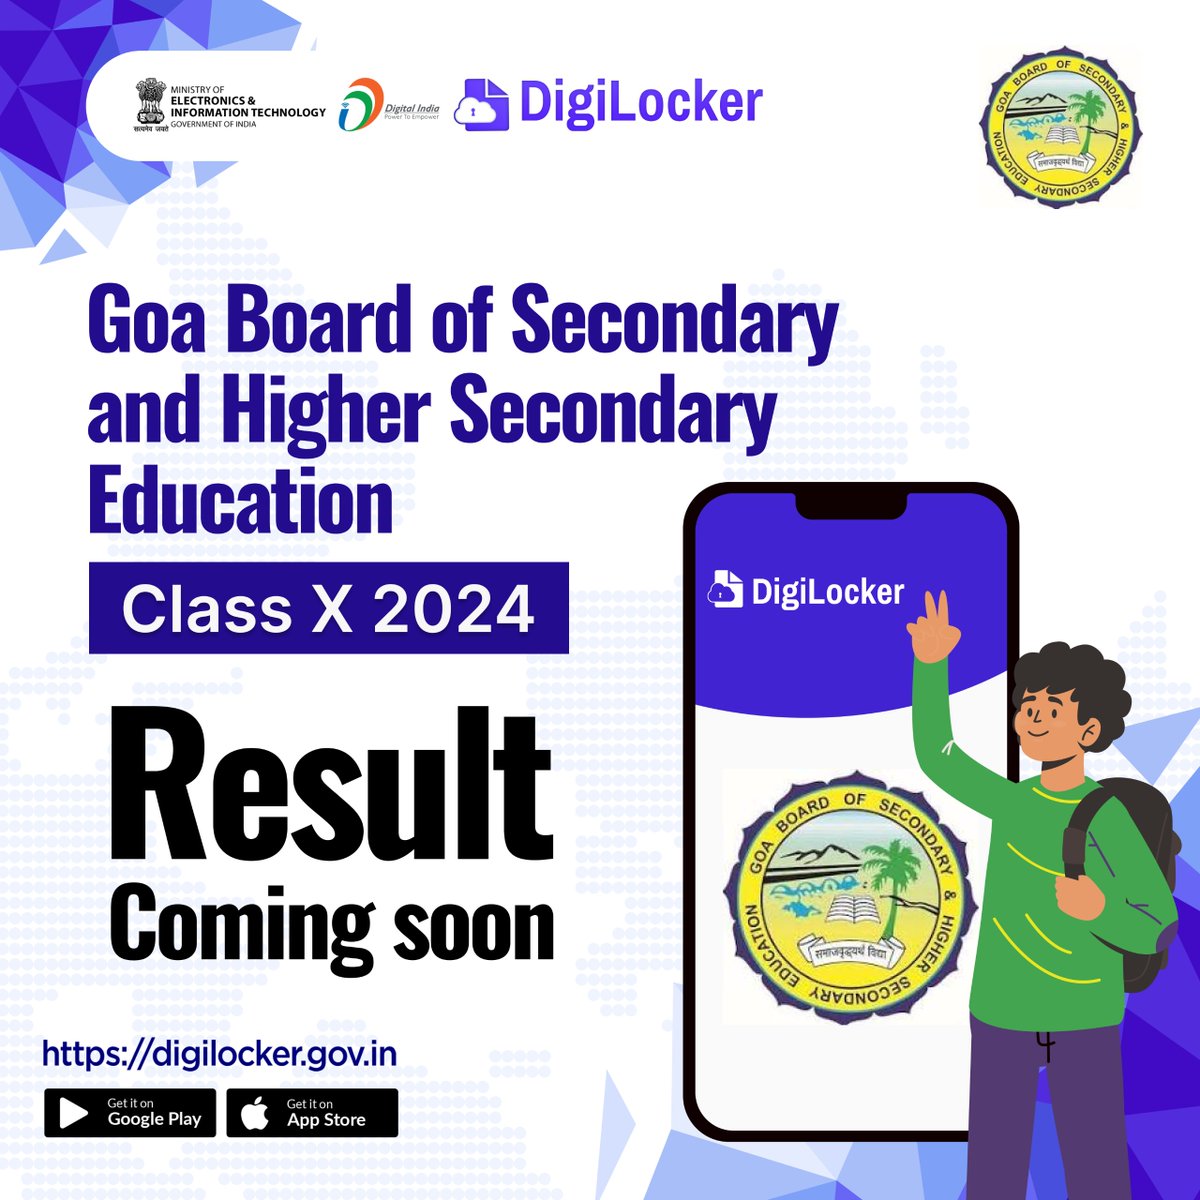 Good News for Students of Goa Board of Secondary and Higher Secondary Education Class X 2024, you will be able to access your Results on your #DigiLocker account. digilocker.gov.in/installapp We wish you the best of luck! #comingsoon #GoaBoard #ClassX